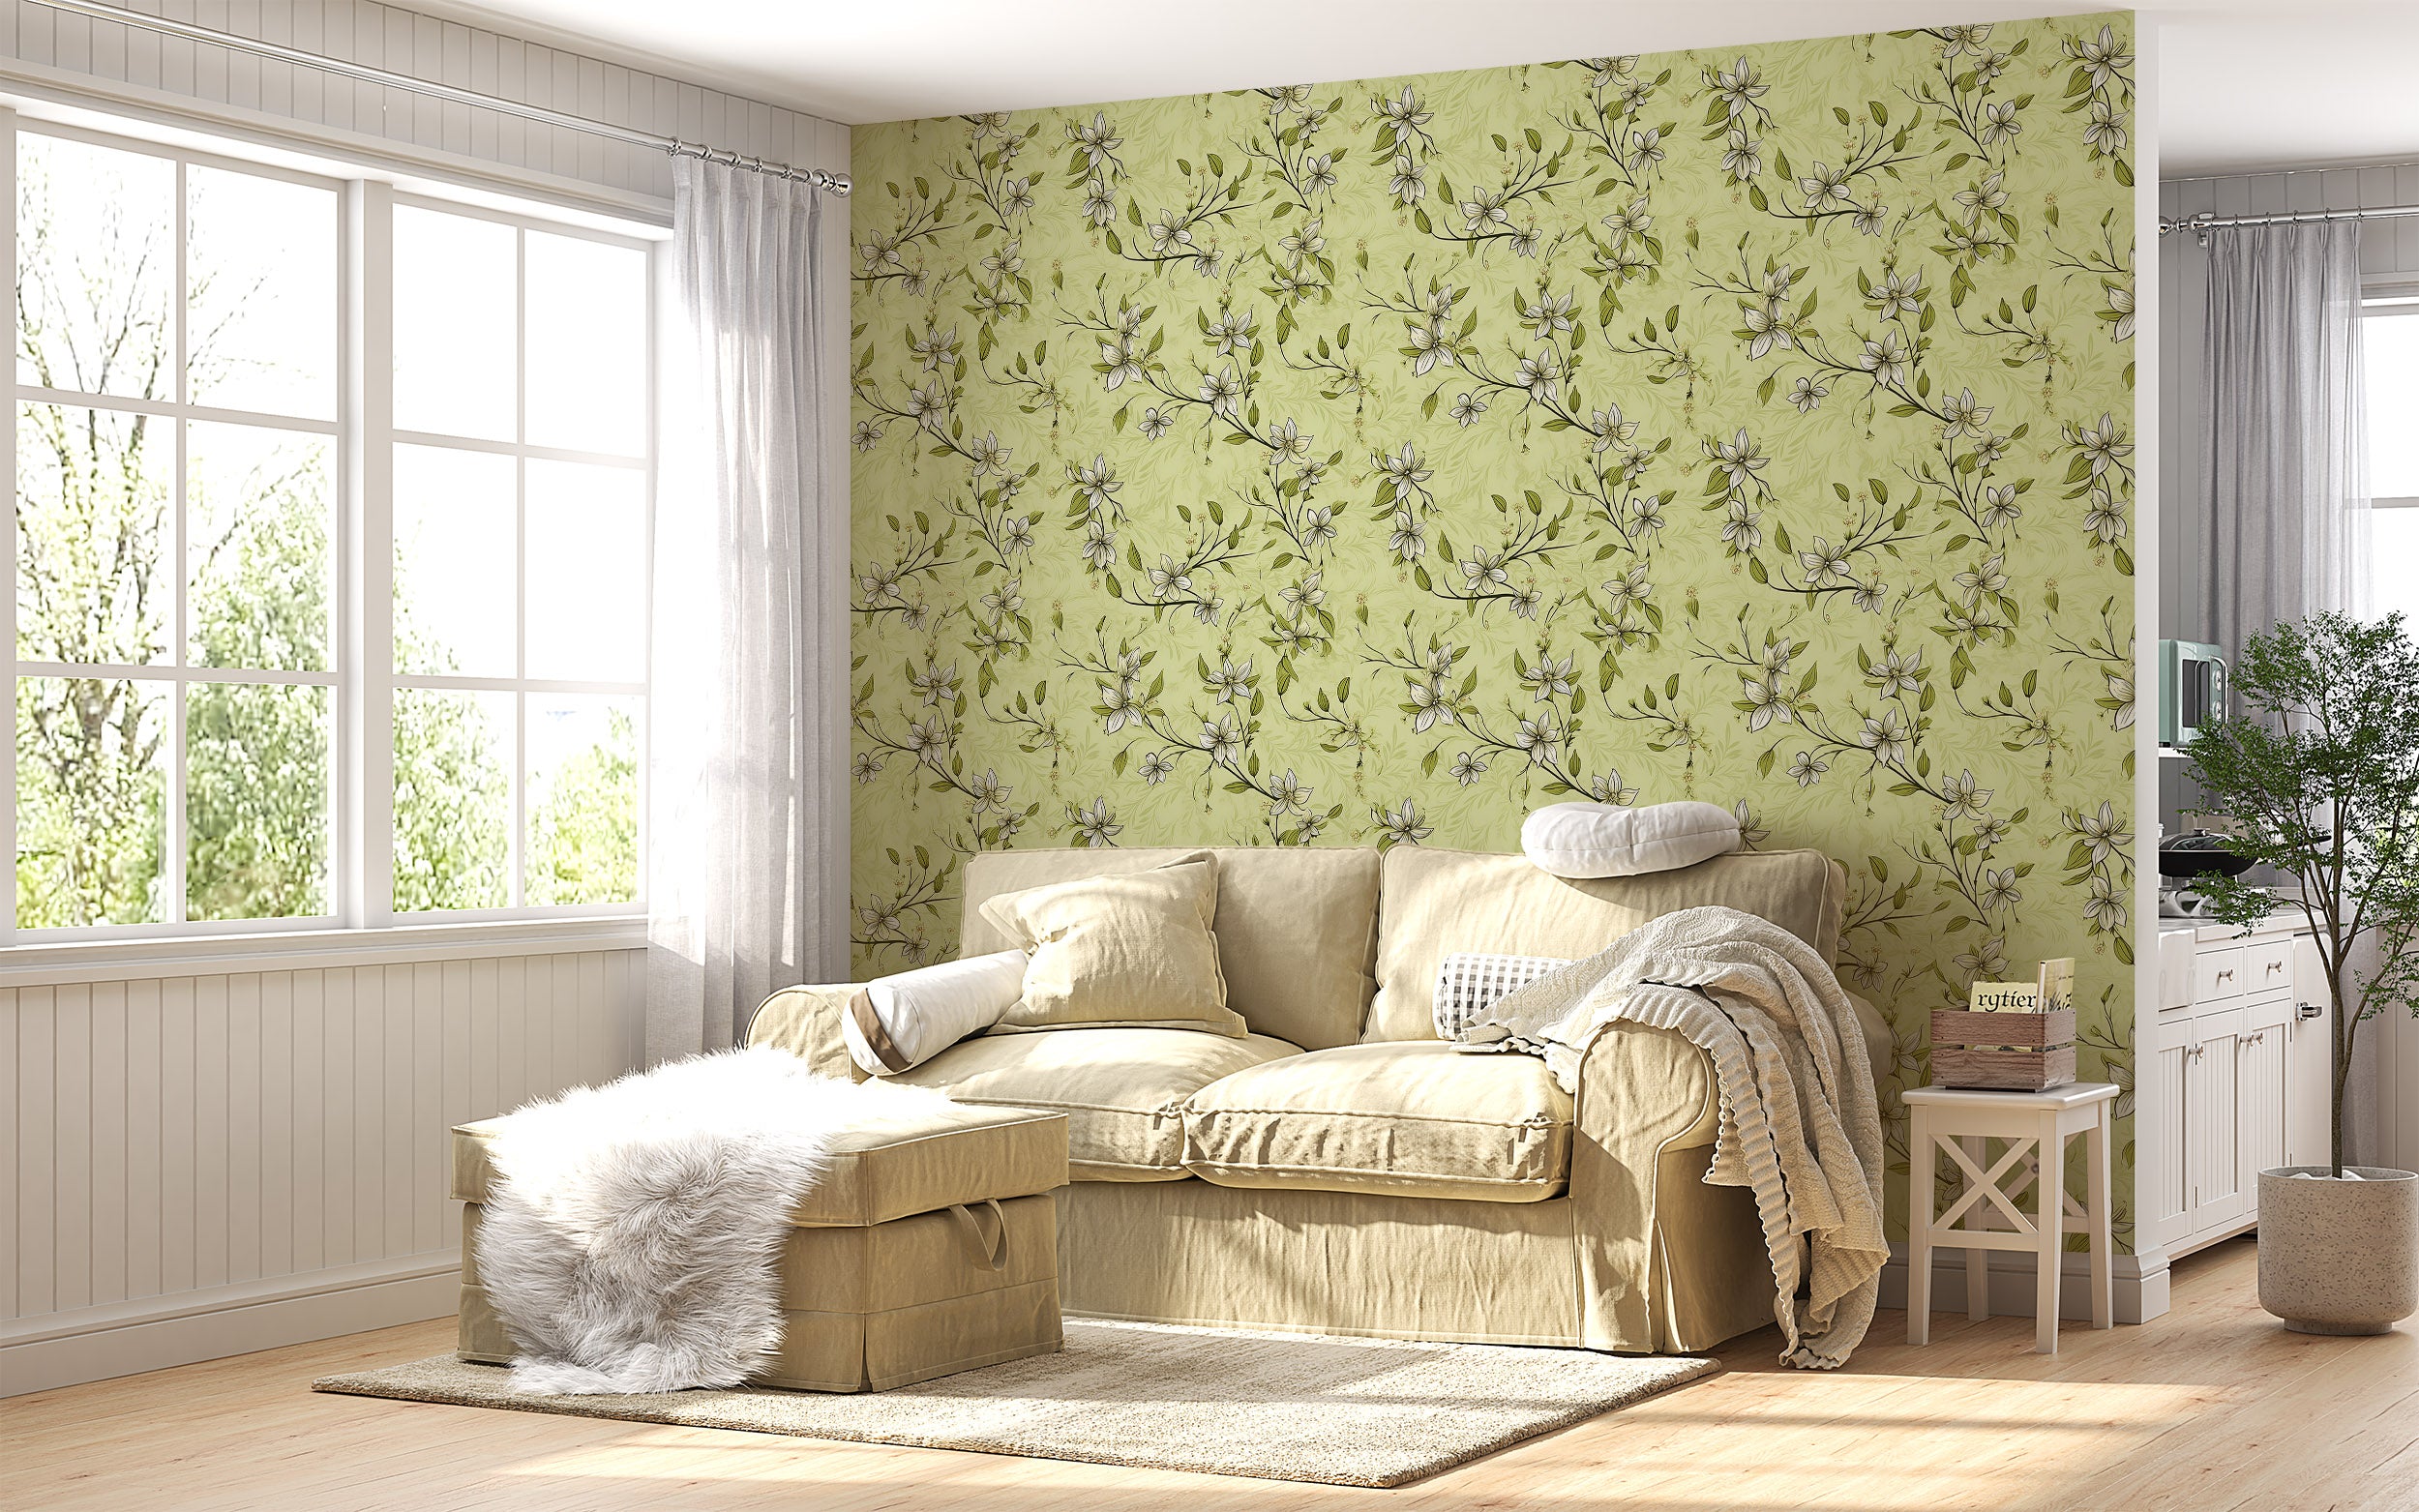 Soothing Light Green Floral Wallpaper Aesthetics